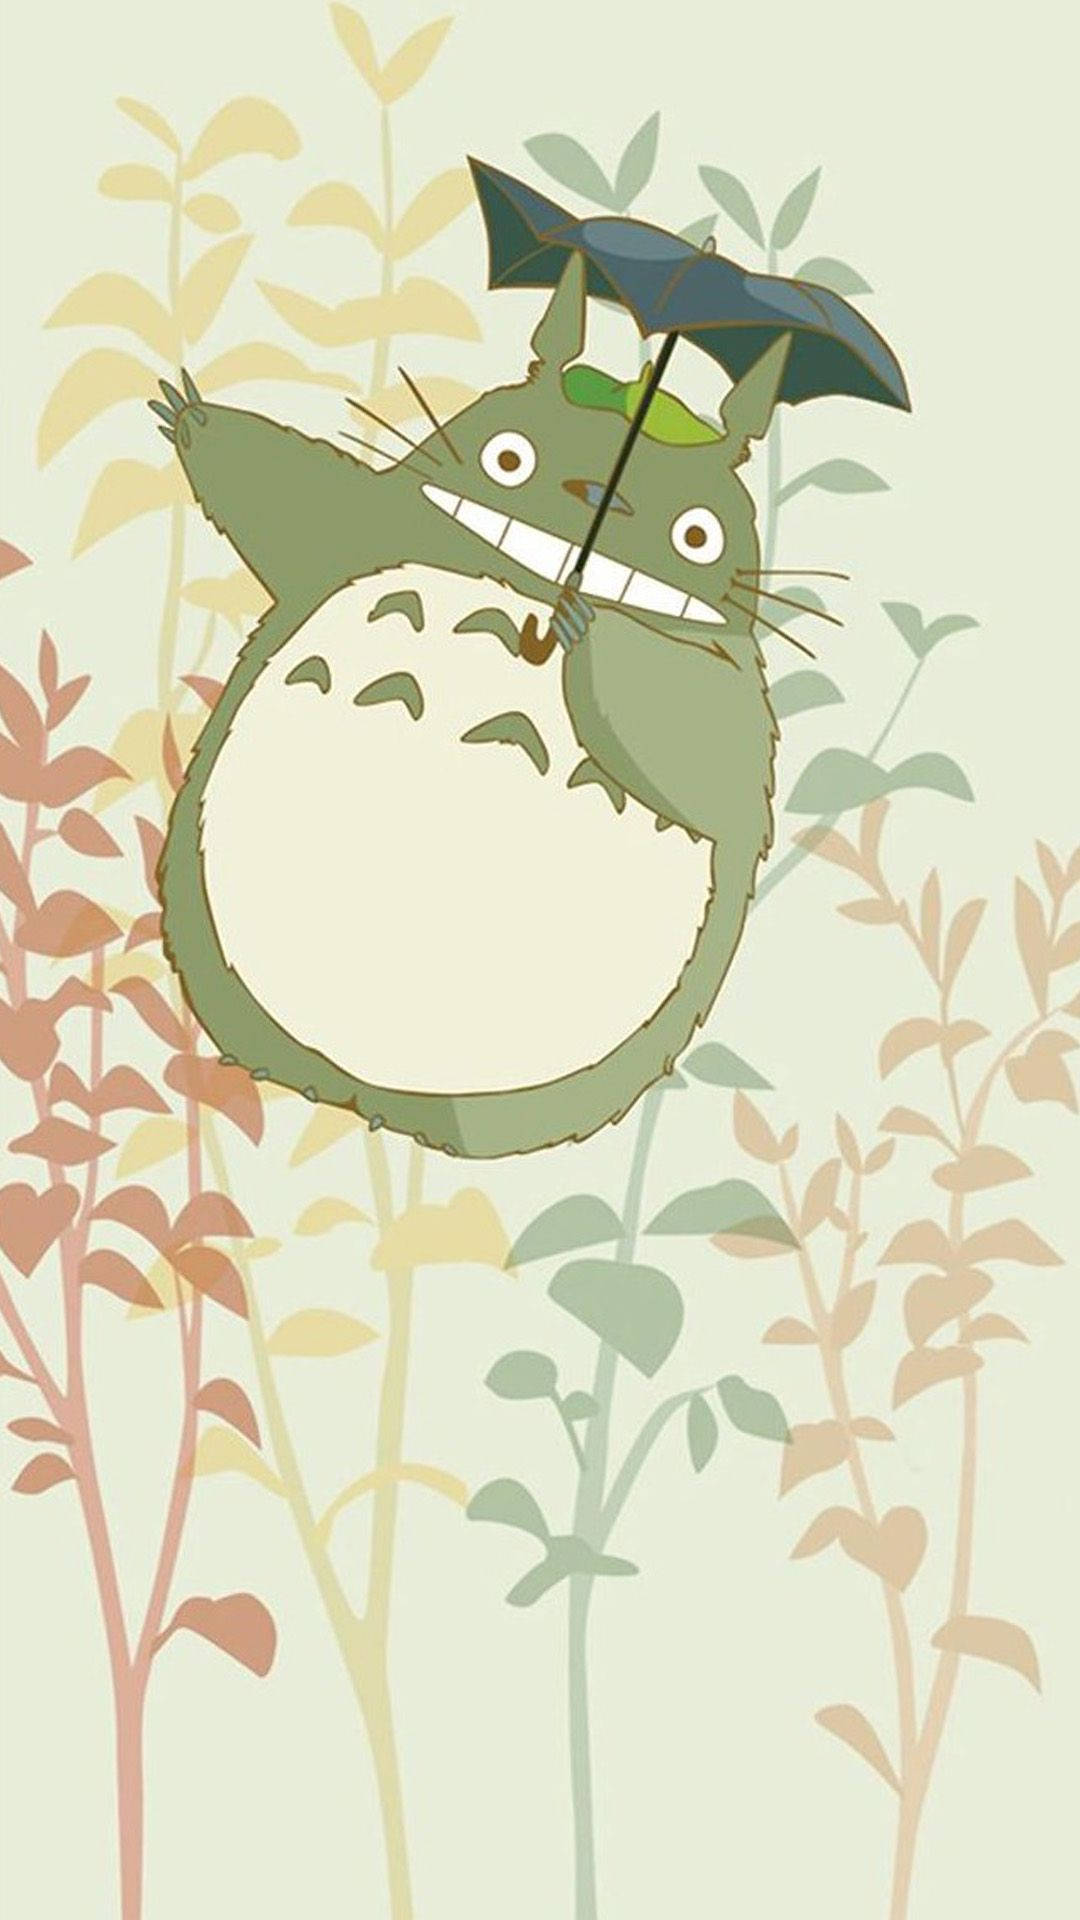 Get enchanted with the magical world of Studio Ghibli on your iPhone Wallpaper